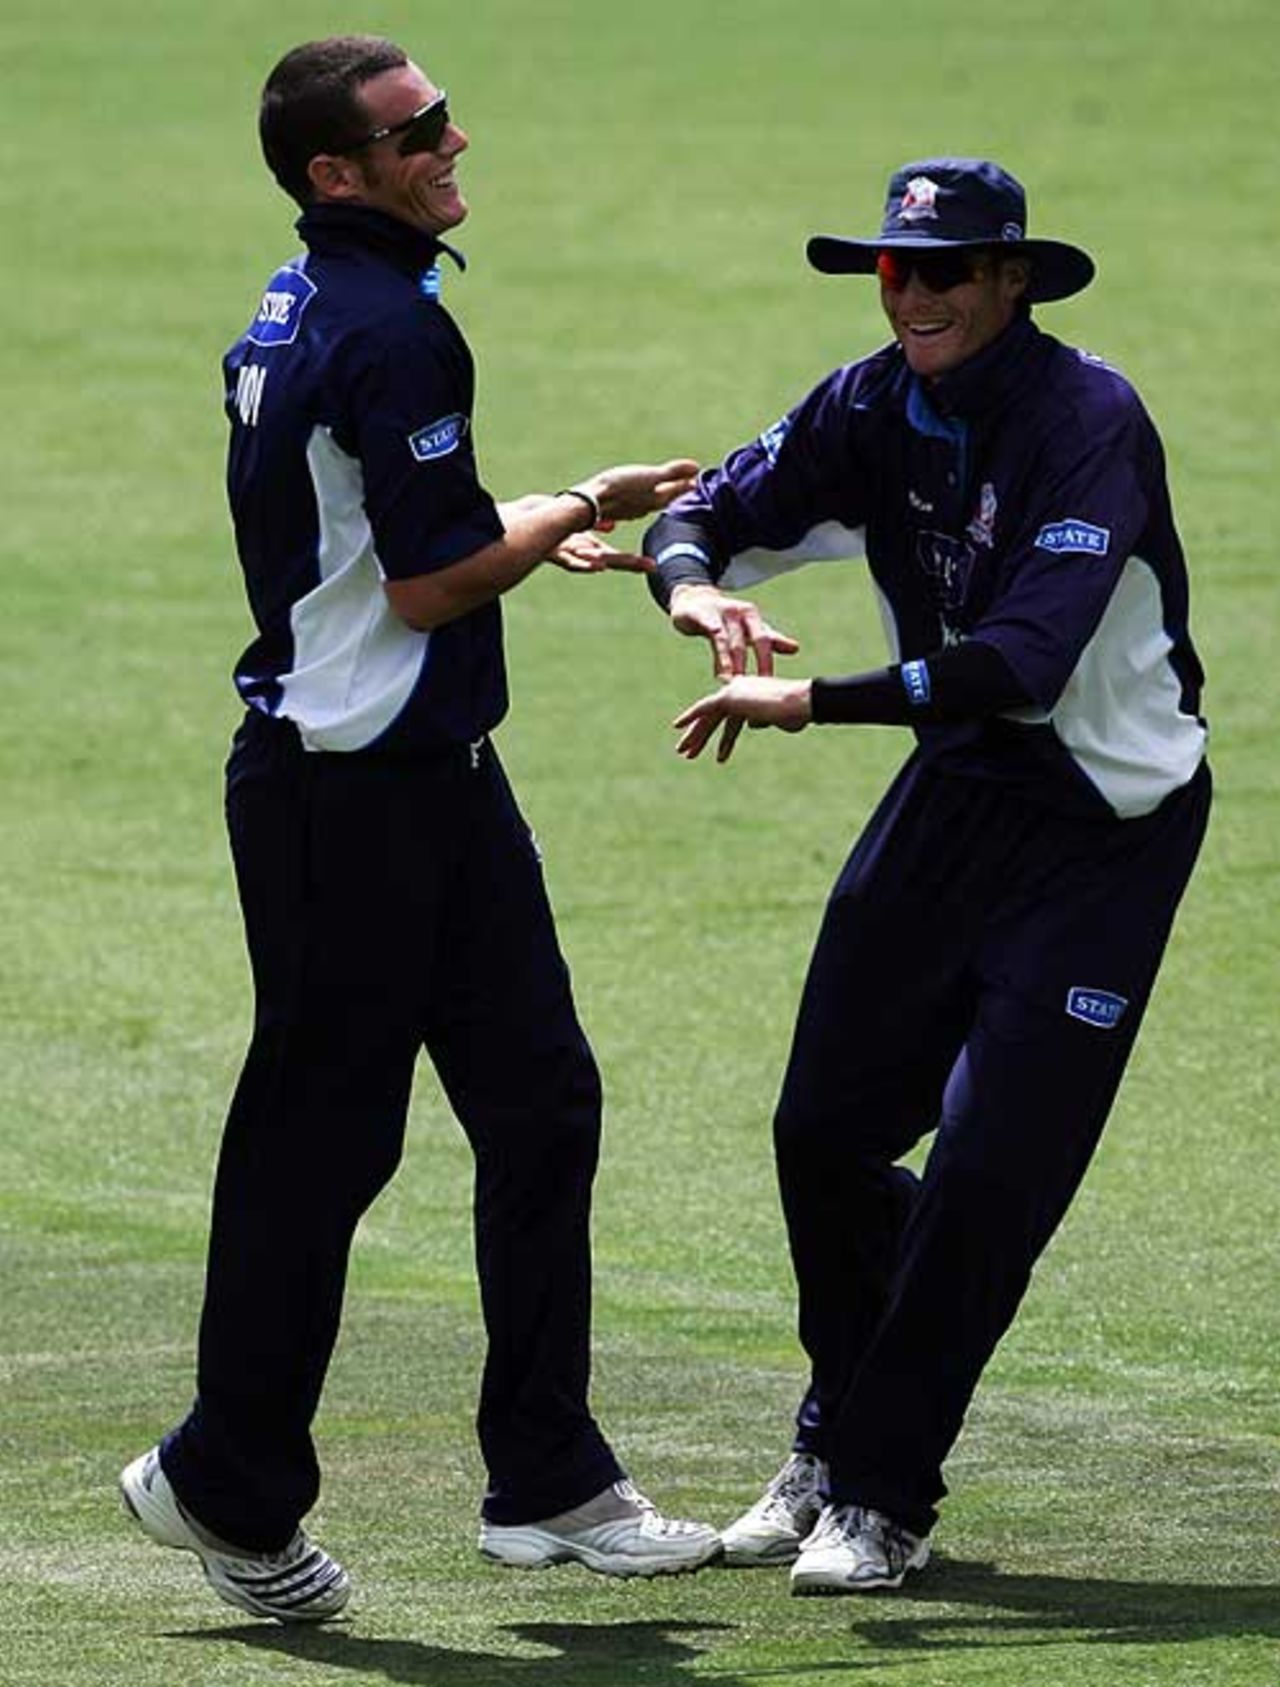 Auckland's Rob Nicol celebrates his dismissal of Peter Ingram, Auckland Aces v Central Stags, Eden Park Outer Oval, Auckland, February 20, 2008 